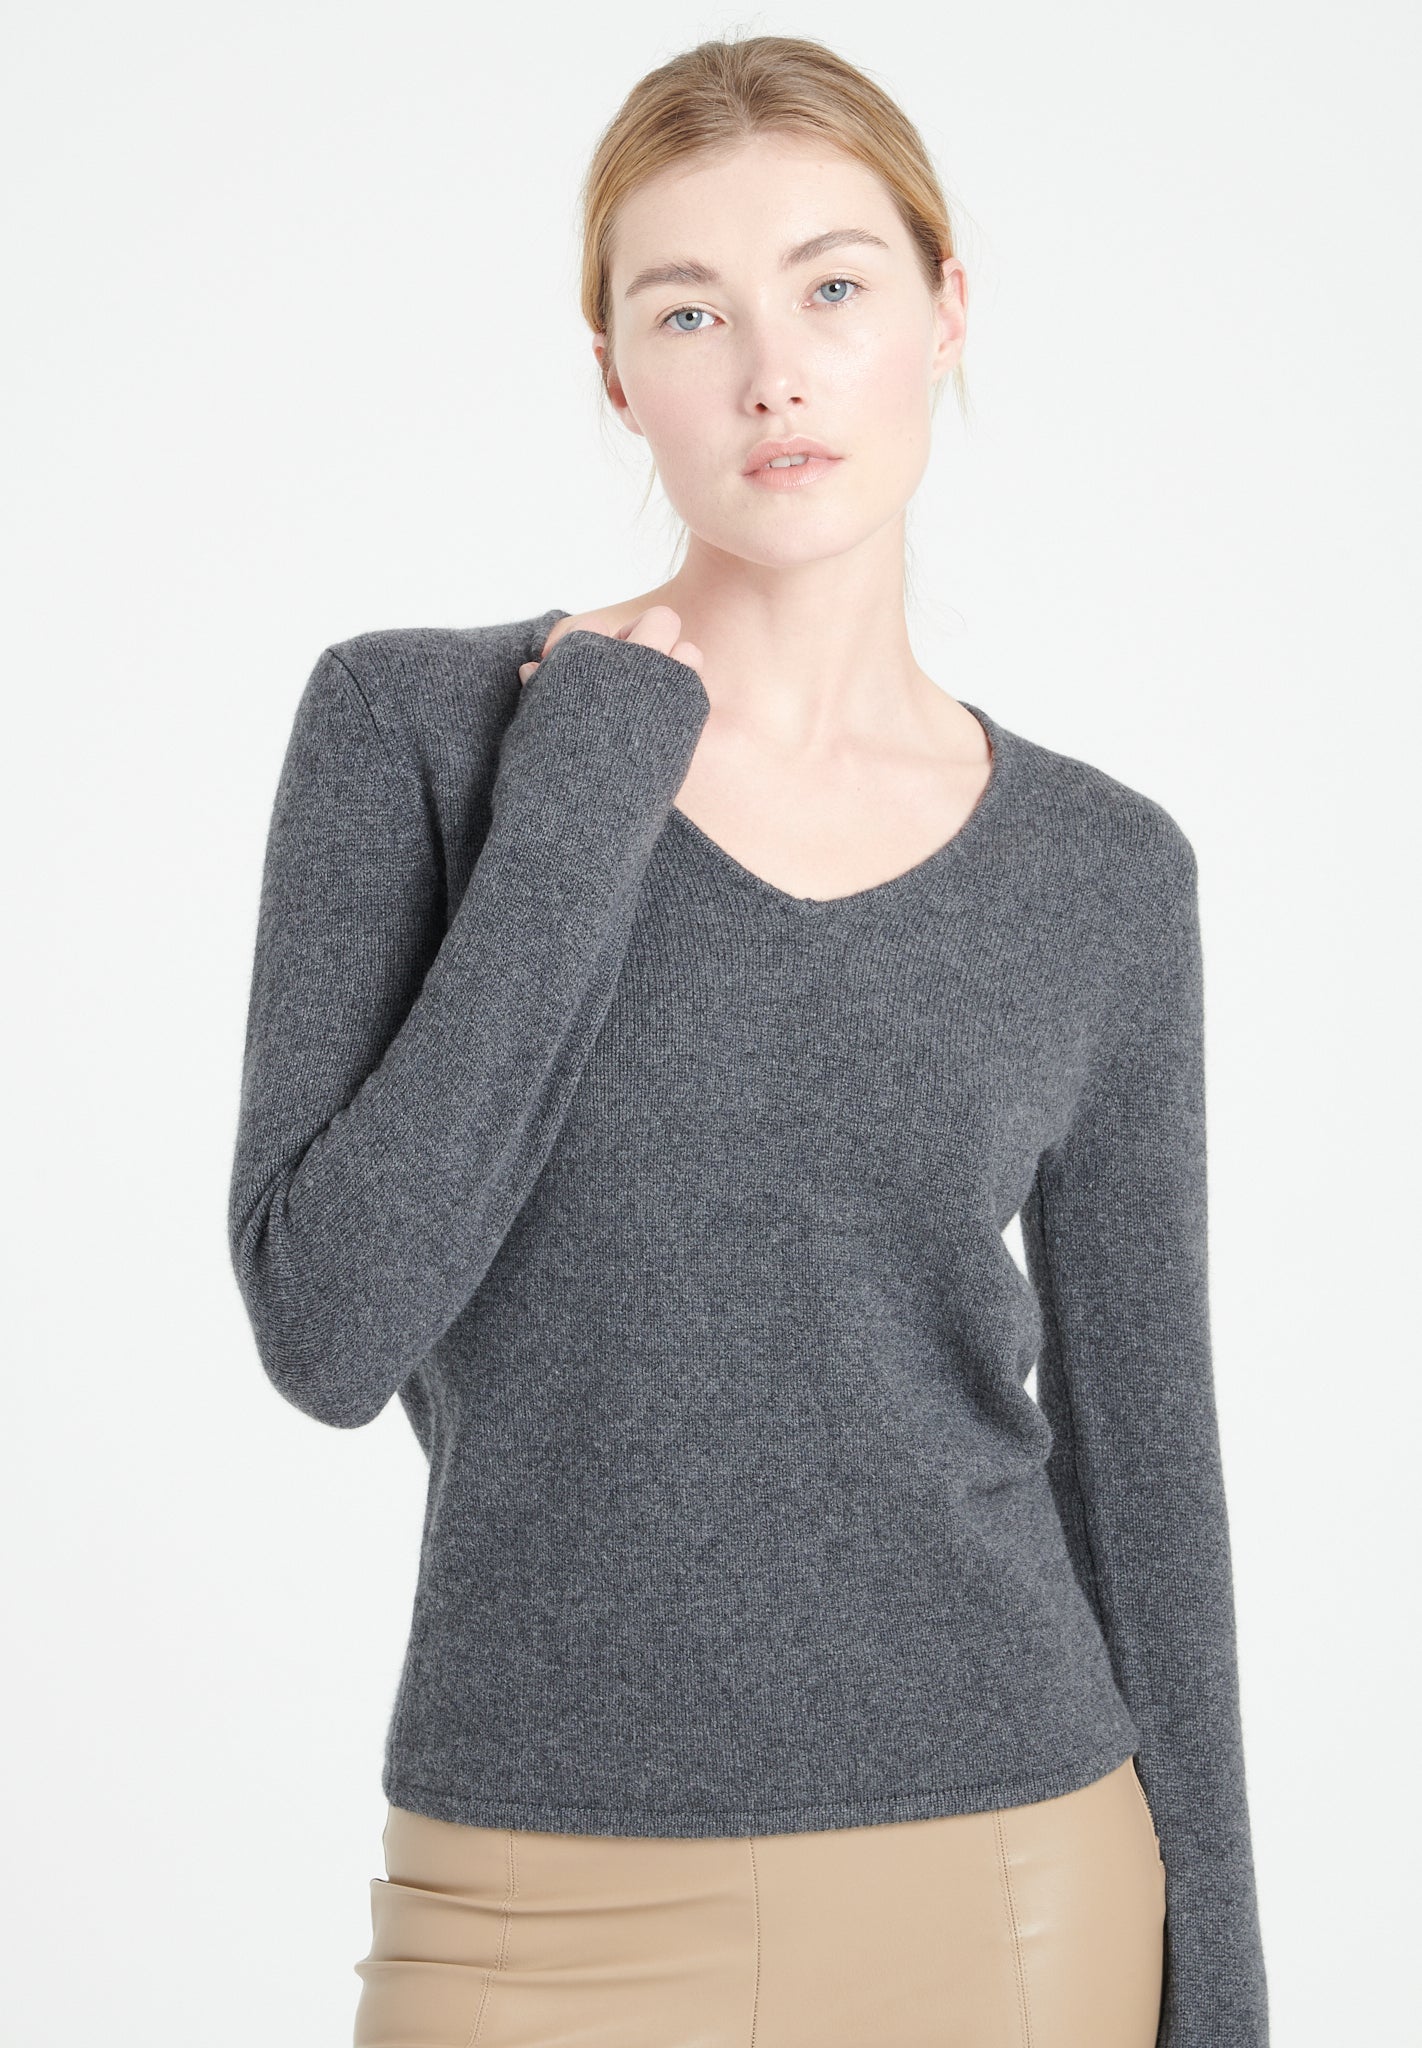 Pure Cashmere 4 Thread V-Neck Sweater (Lilly 20)